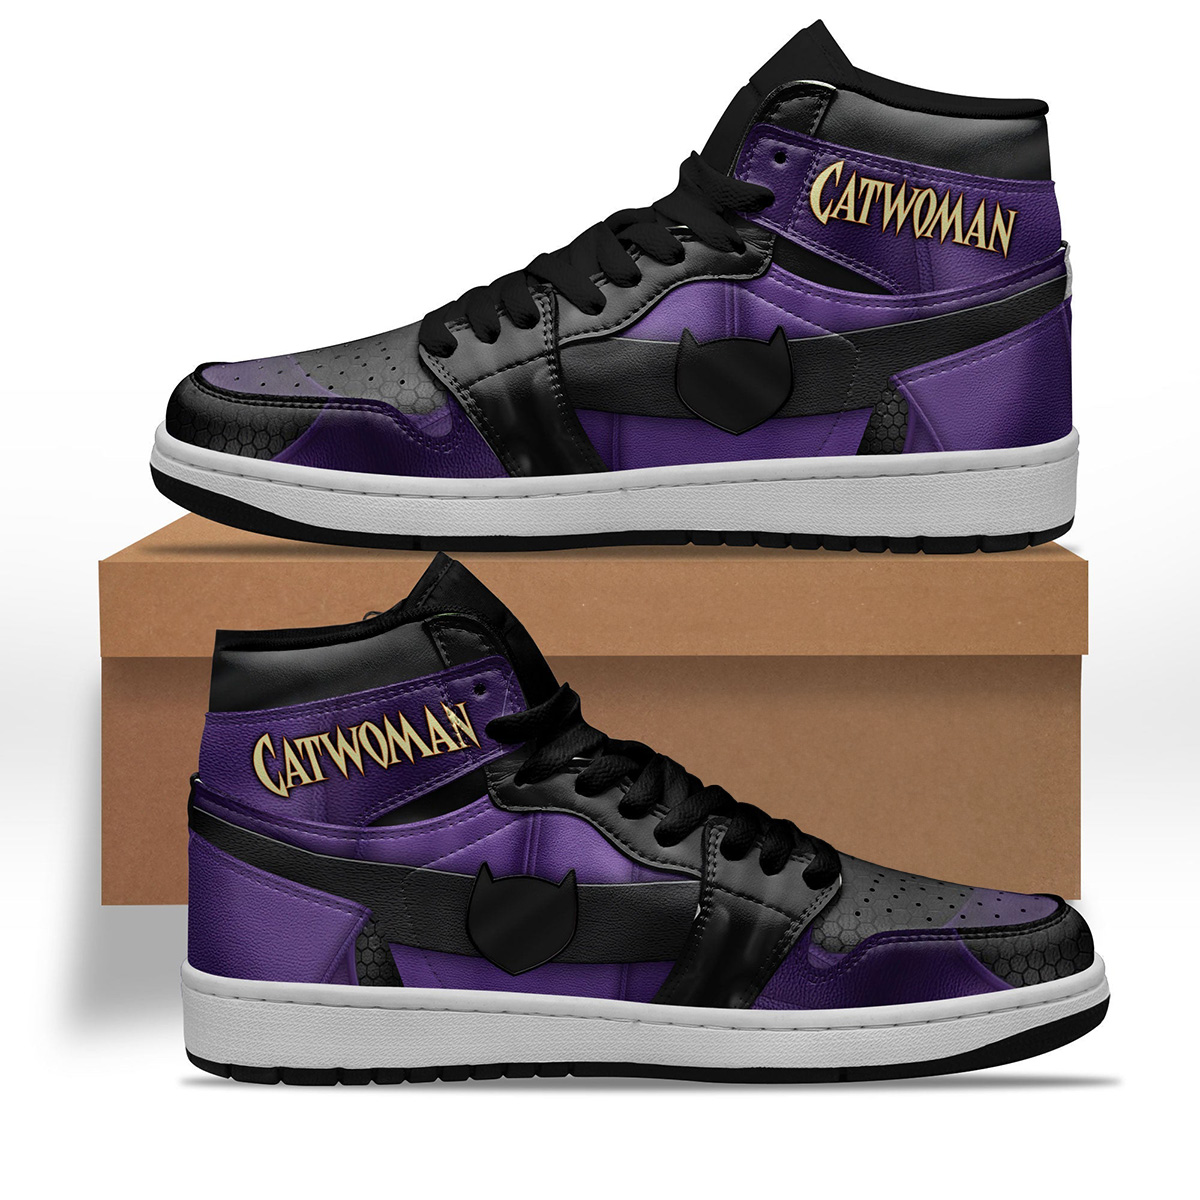 Catwoman Shoes Custom Villains Sneakers